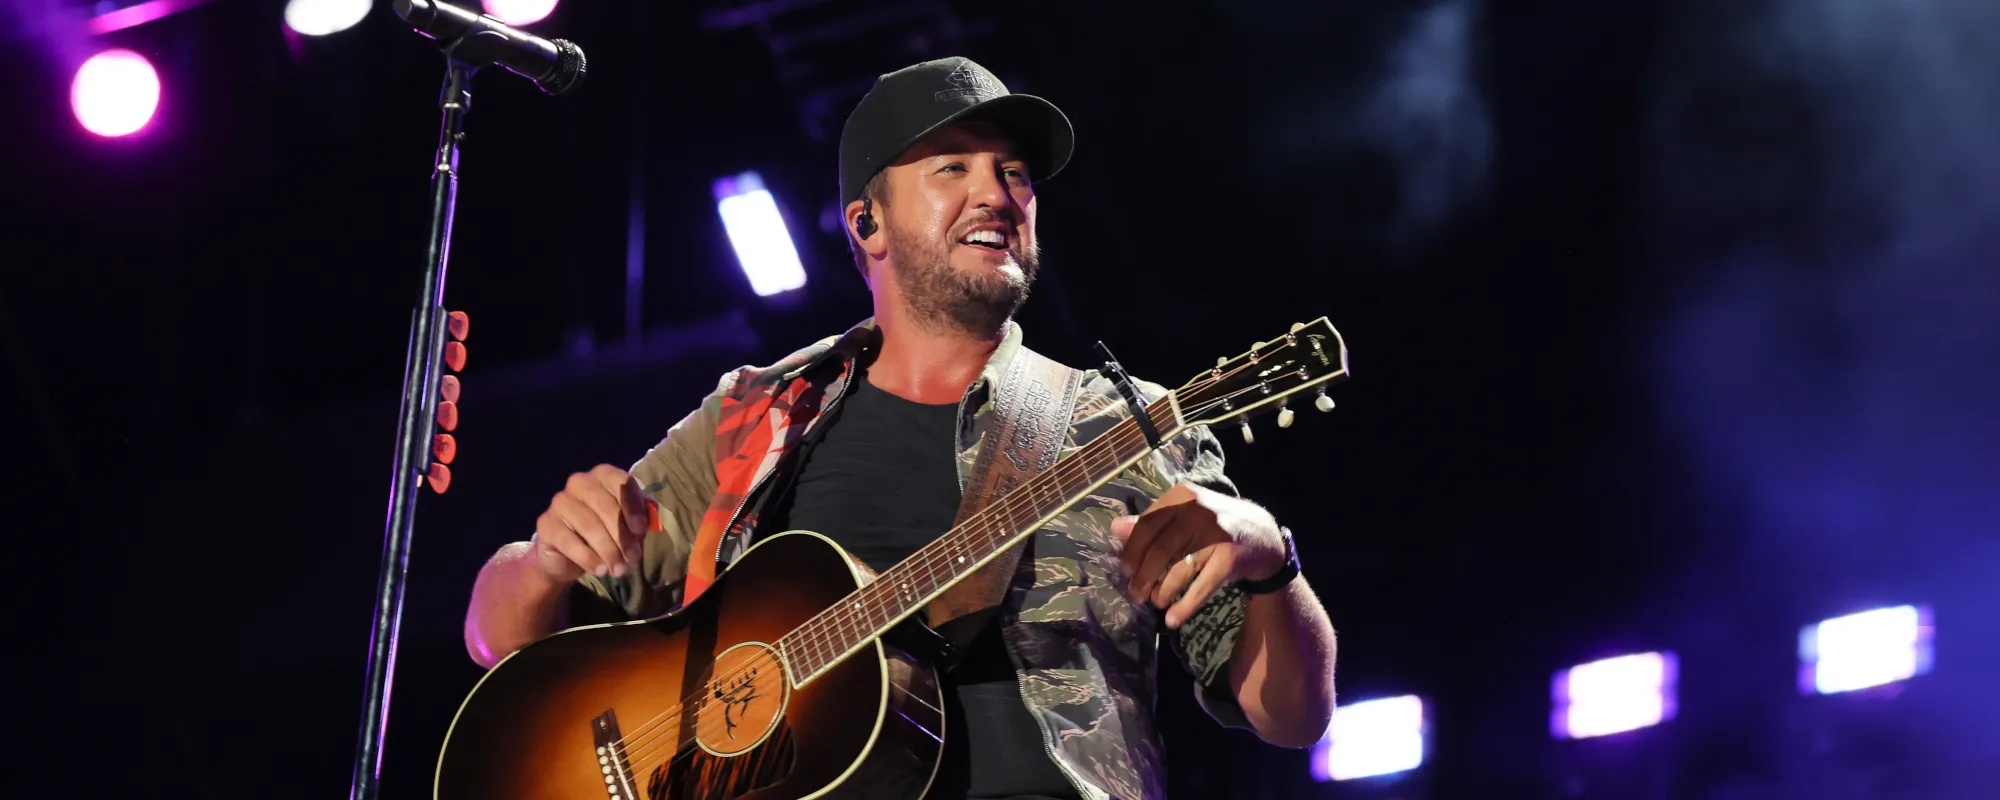 Luke Bryan’s “Got a Beer in My Hand” in Lively New Single